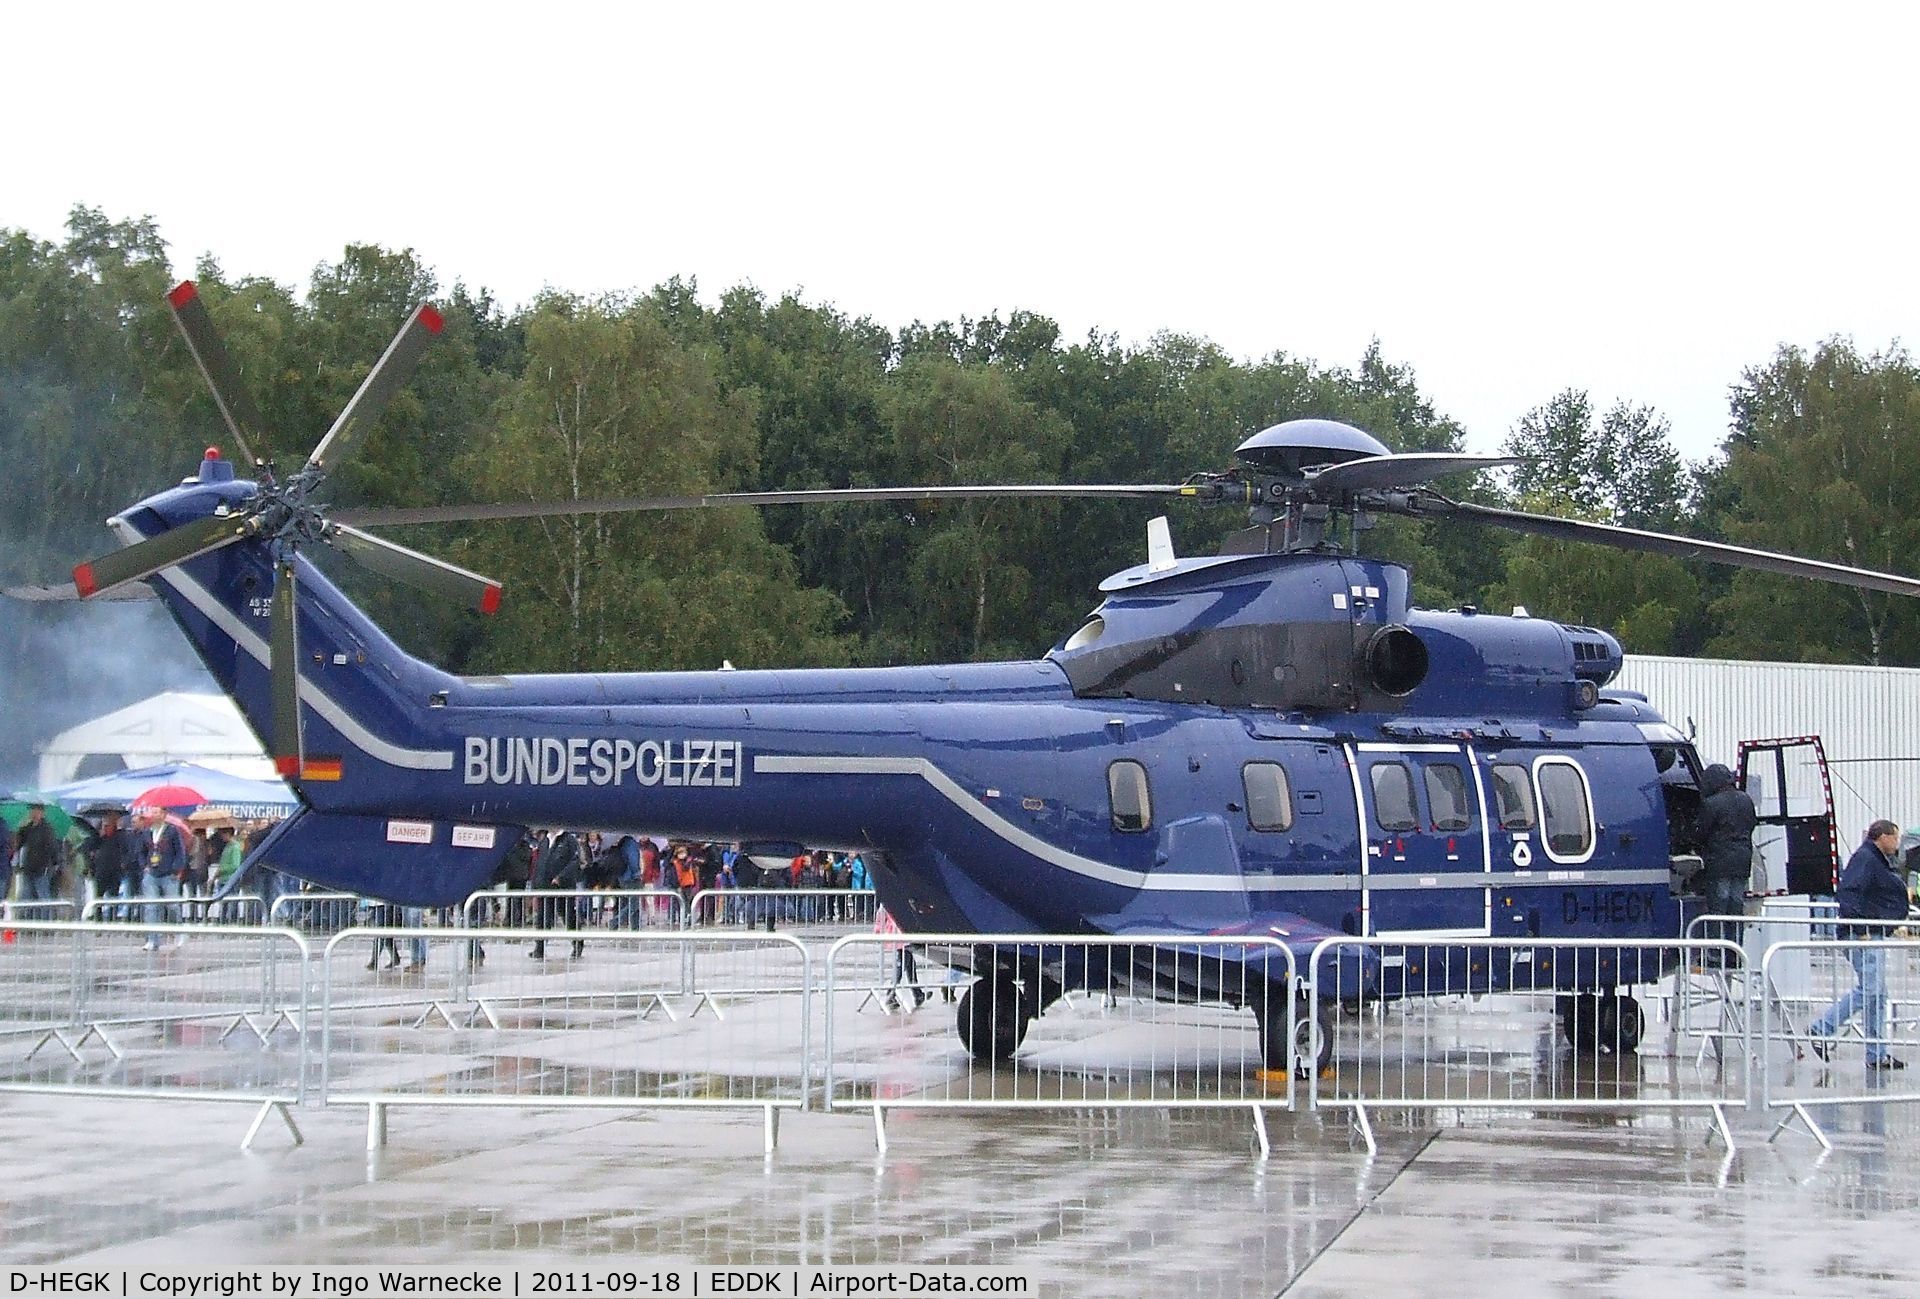 D-HEGK, 2009 Aerospatiale AS-332L-1 Super Puma C/N 2720, Aerospatiale AS.332L1 Super Puma of the Bundespolizei at the DLR 2011 air and space day on the side of Cologne airport